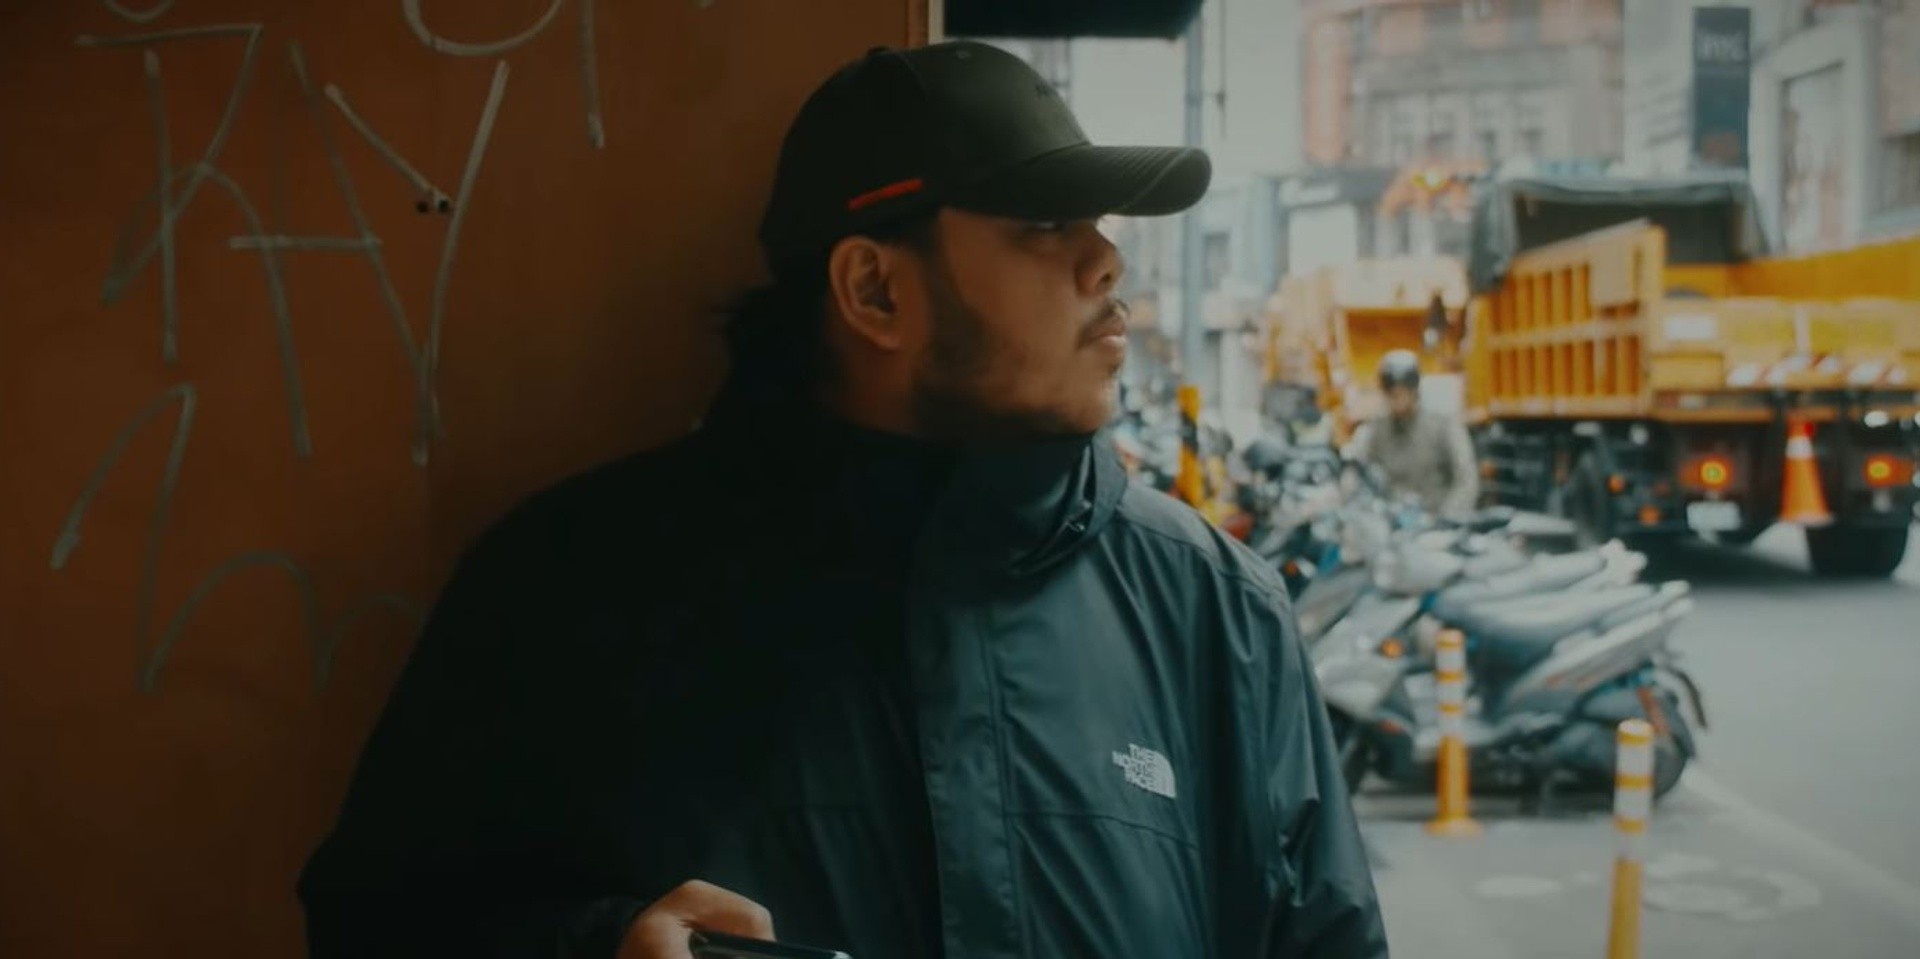 Monty Macalino runs down the streets of Taiwan in Mayonnaise and I Belong to the Zoo 'Pahirapan' music video – watch